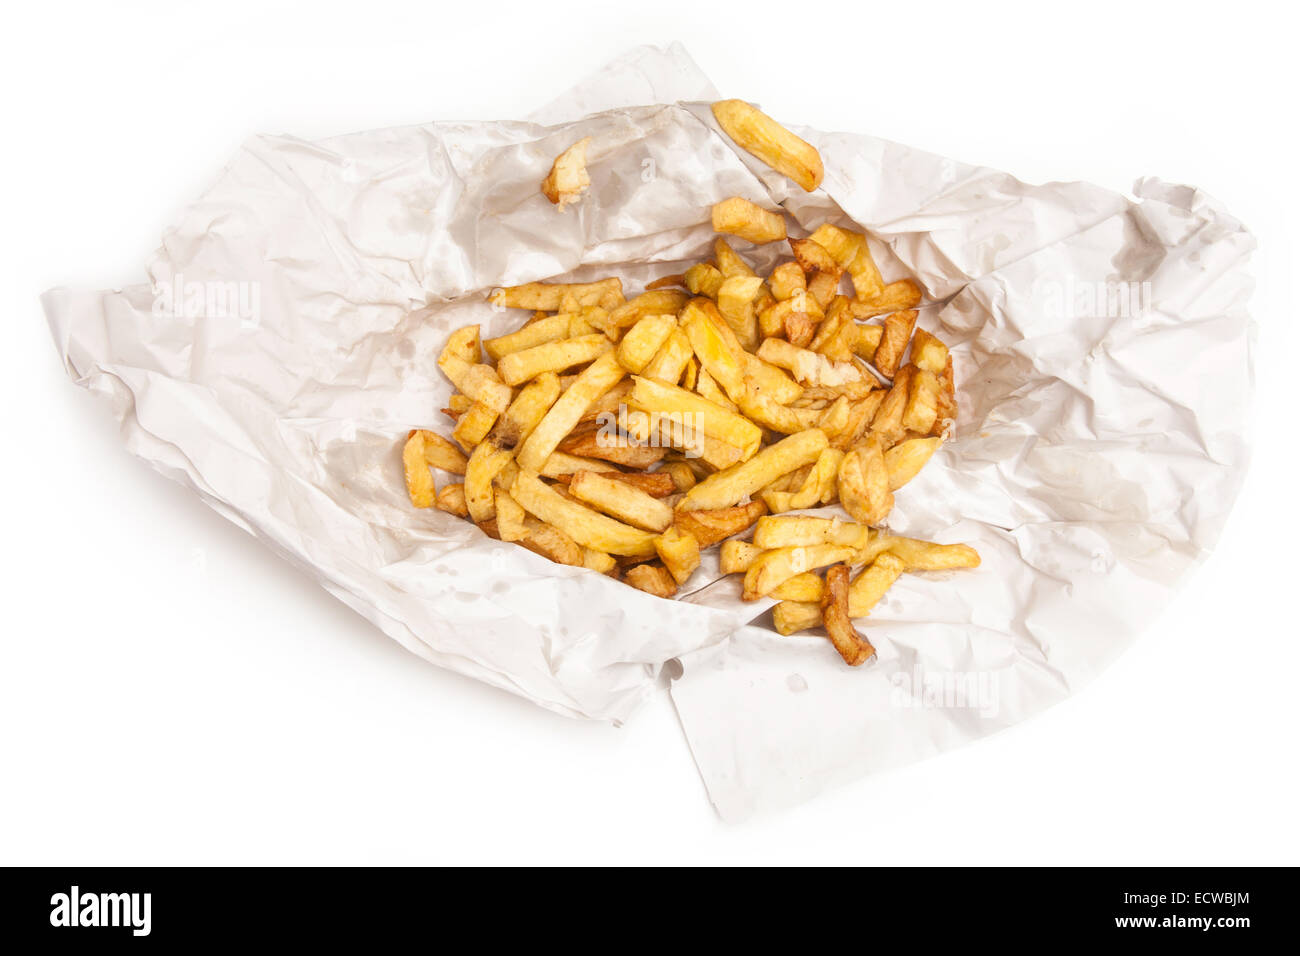 Large portion of chips from the fish and chip shop. Stock Photo